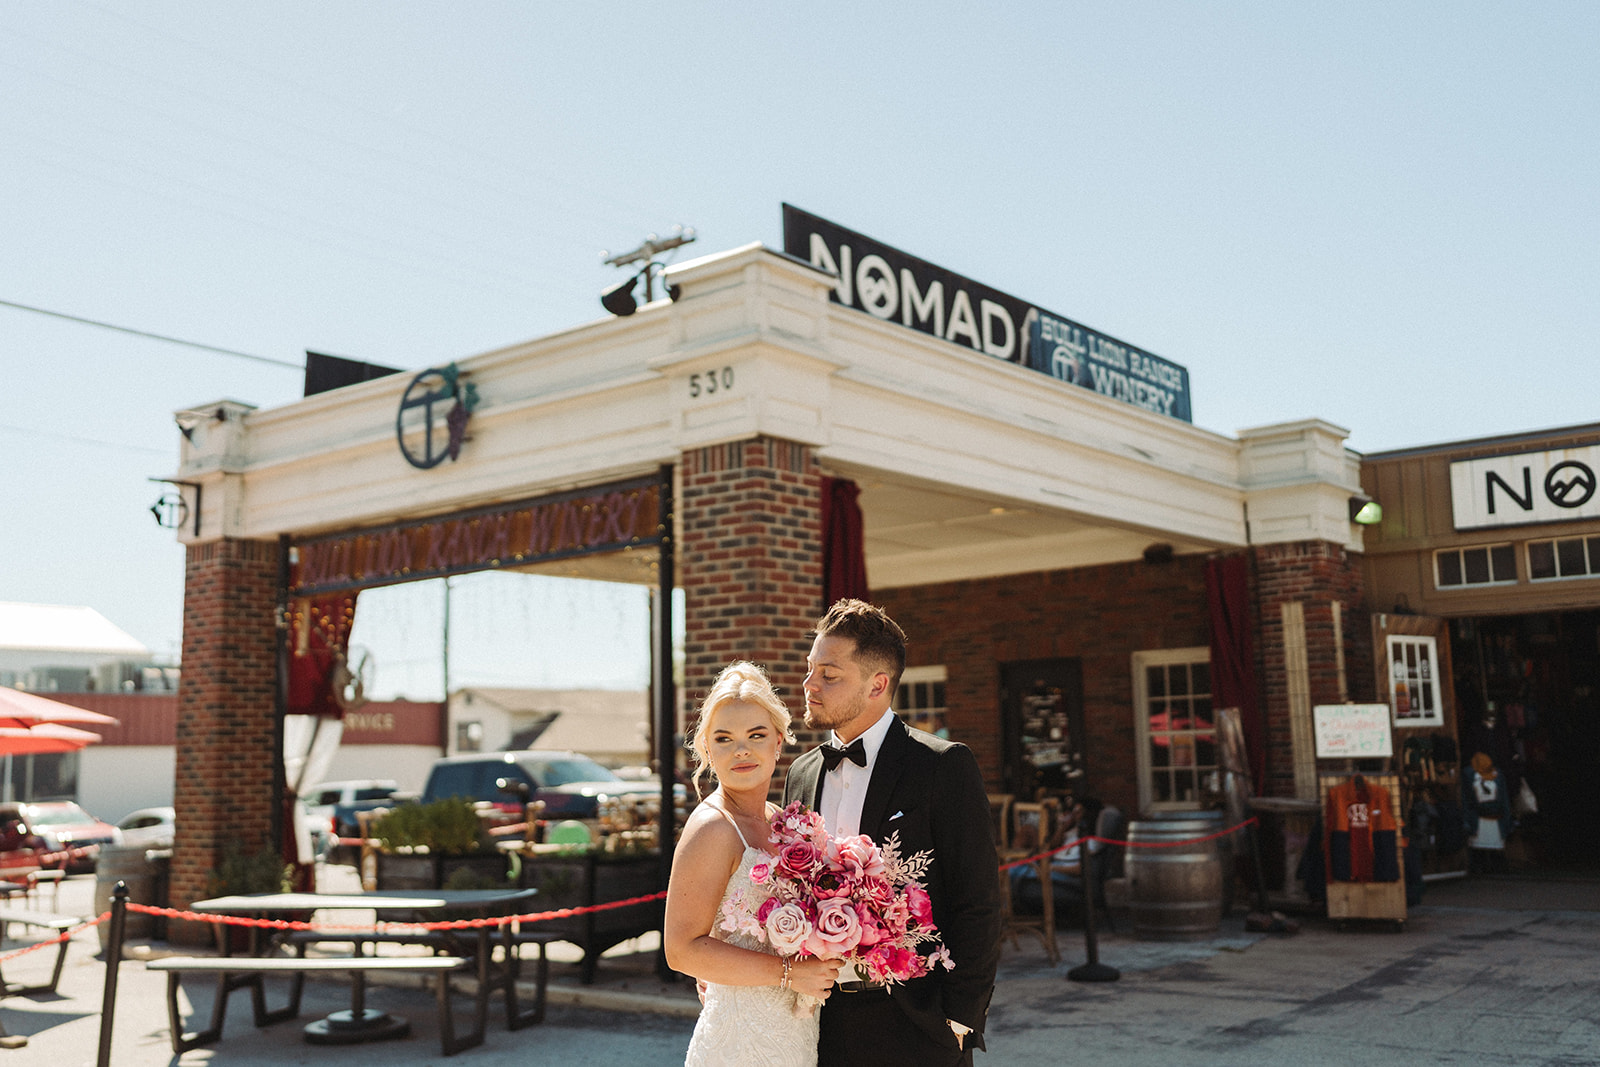 Vintage Wedding At The Lancaster Theater In Grapevine, Texas